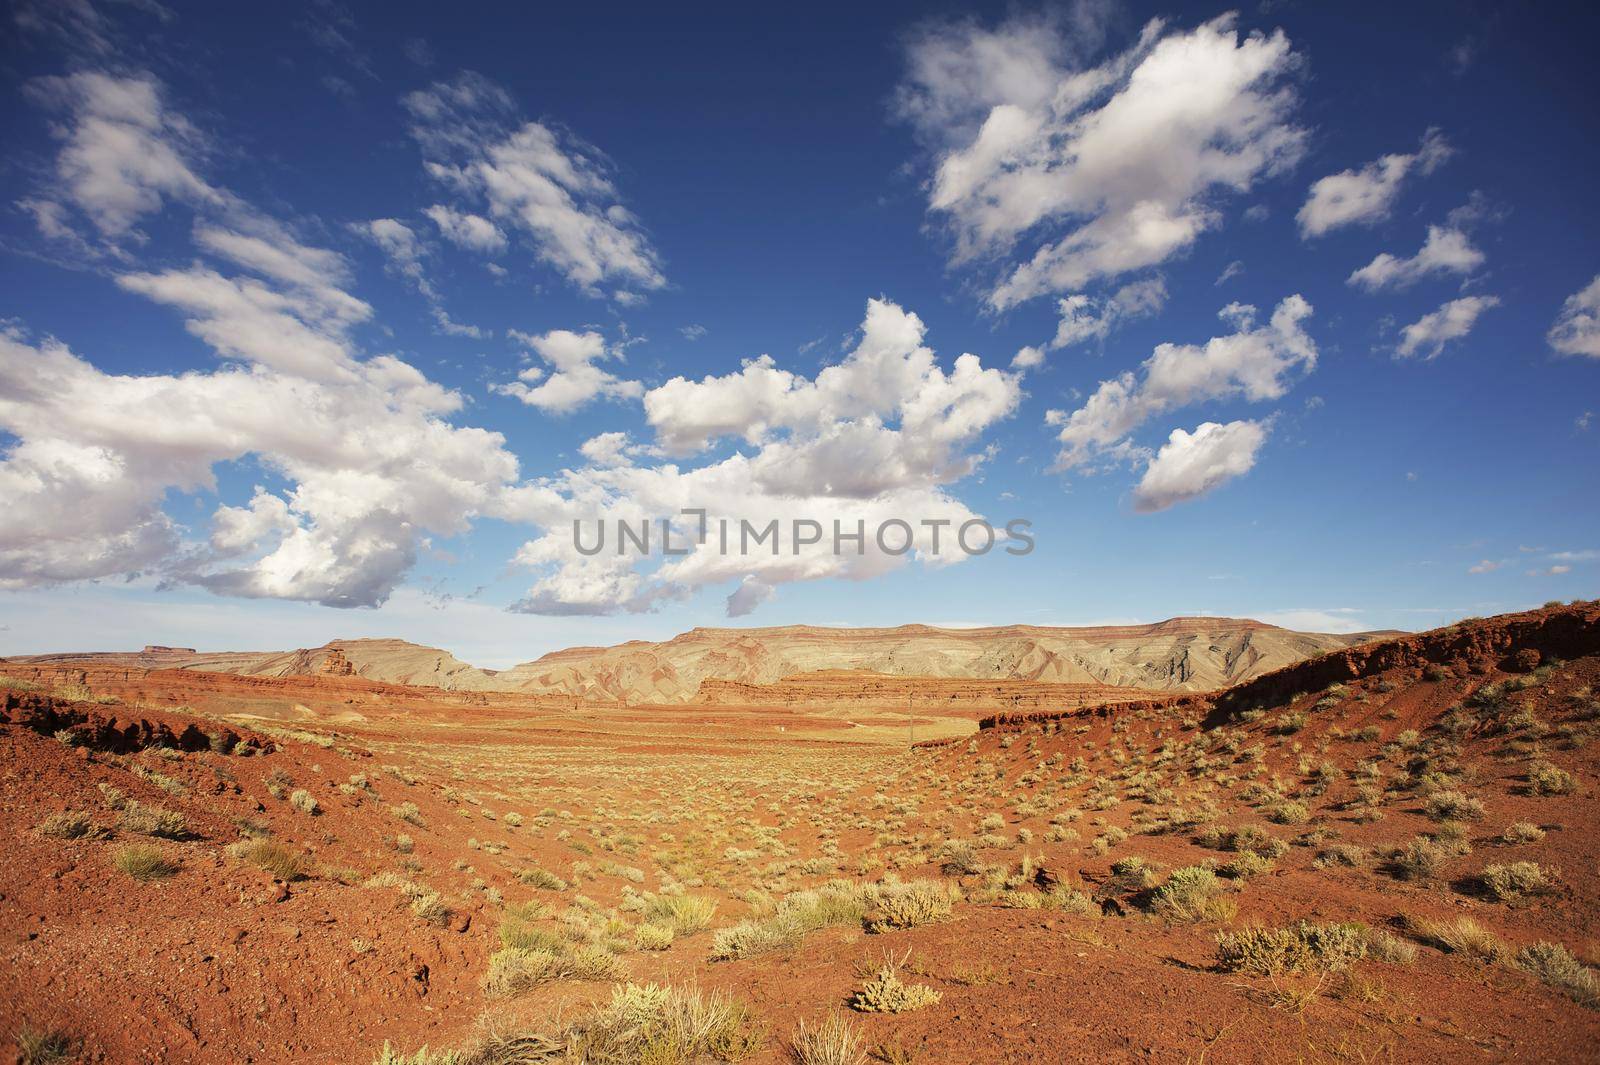 Mexican Hat Utah. Raw Mexican Hat Desert Landscape. Southern Utah State, United States.  by welcomia